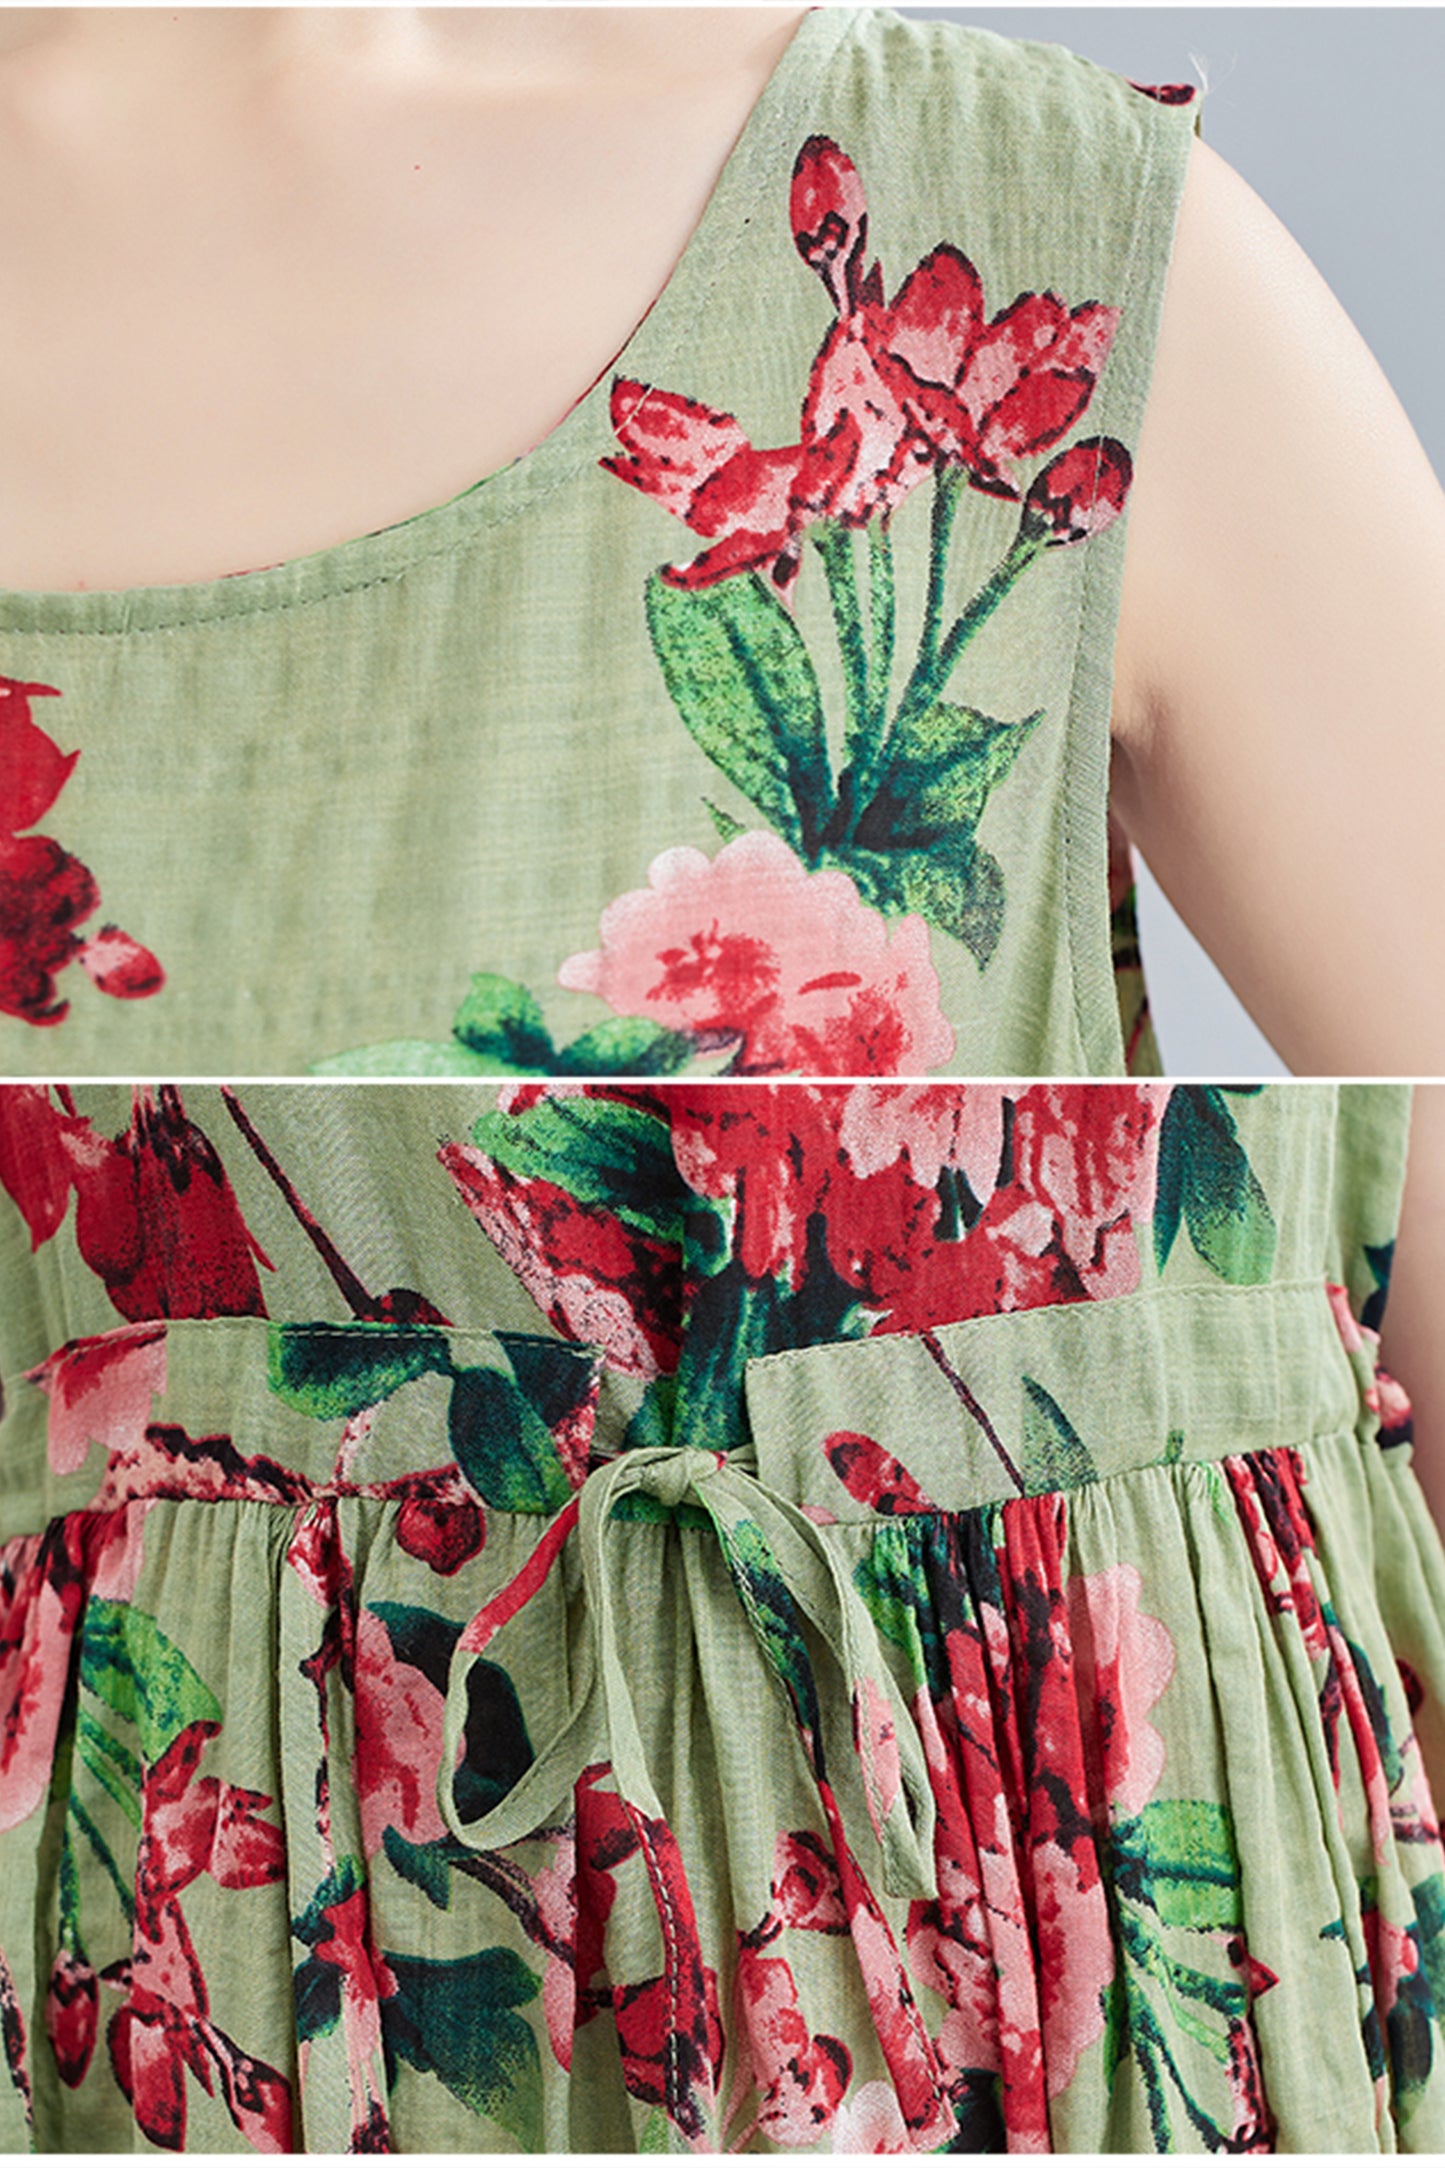 Green Floral Print Loose Strappy Dress with Pocket